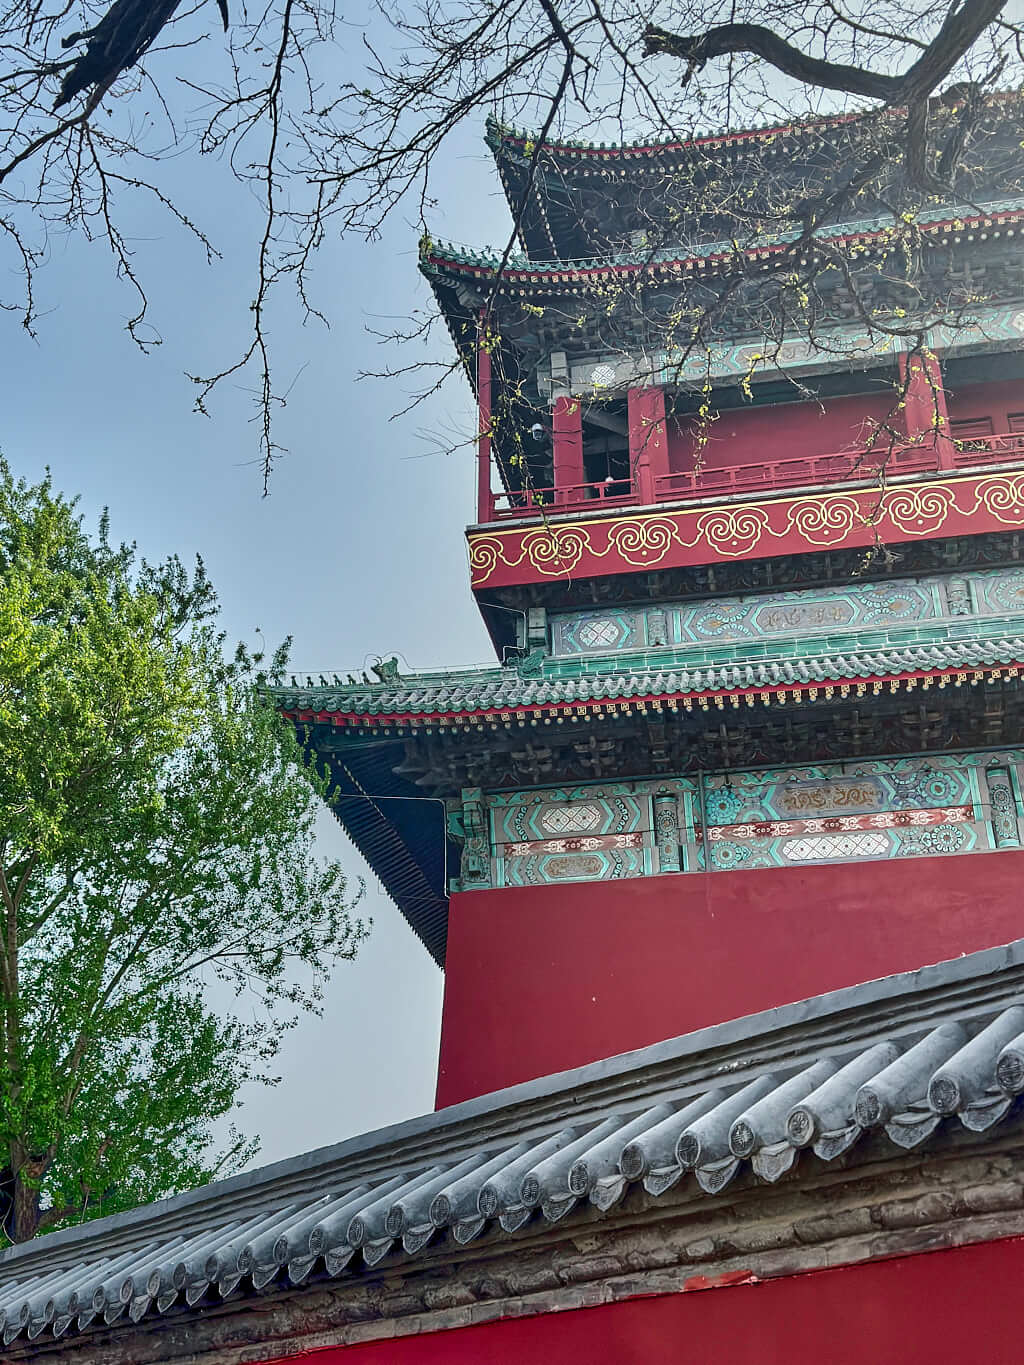 Drum Tower and Bell Tower (钟楼 鼓楼) in BEijing